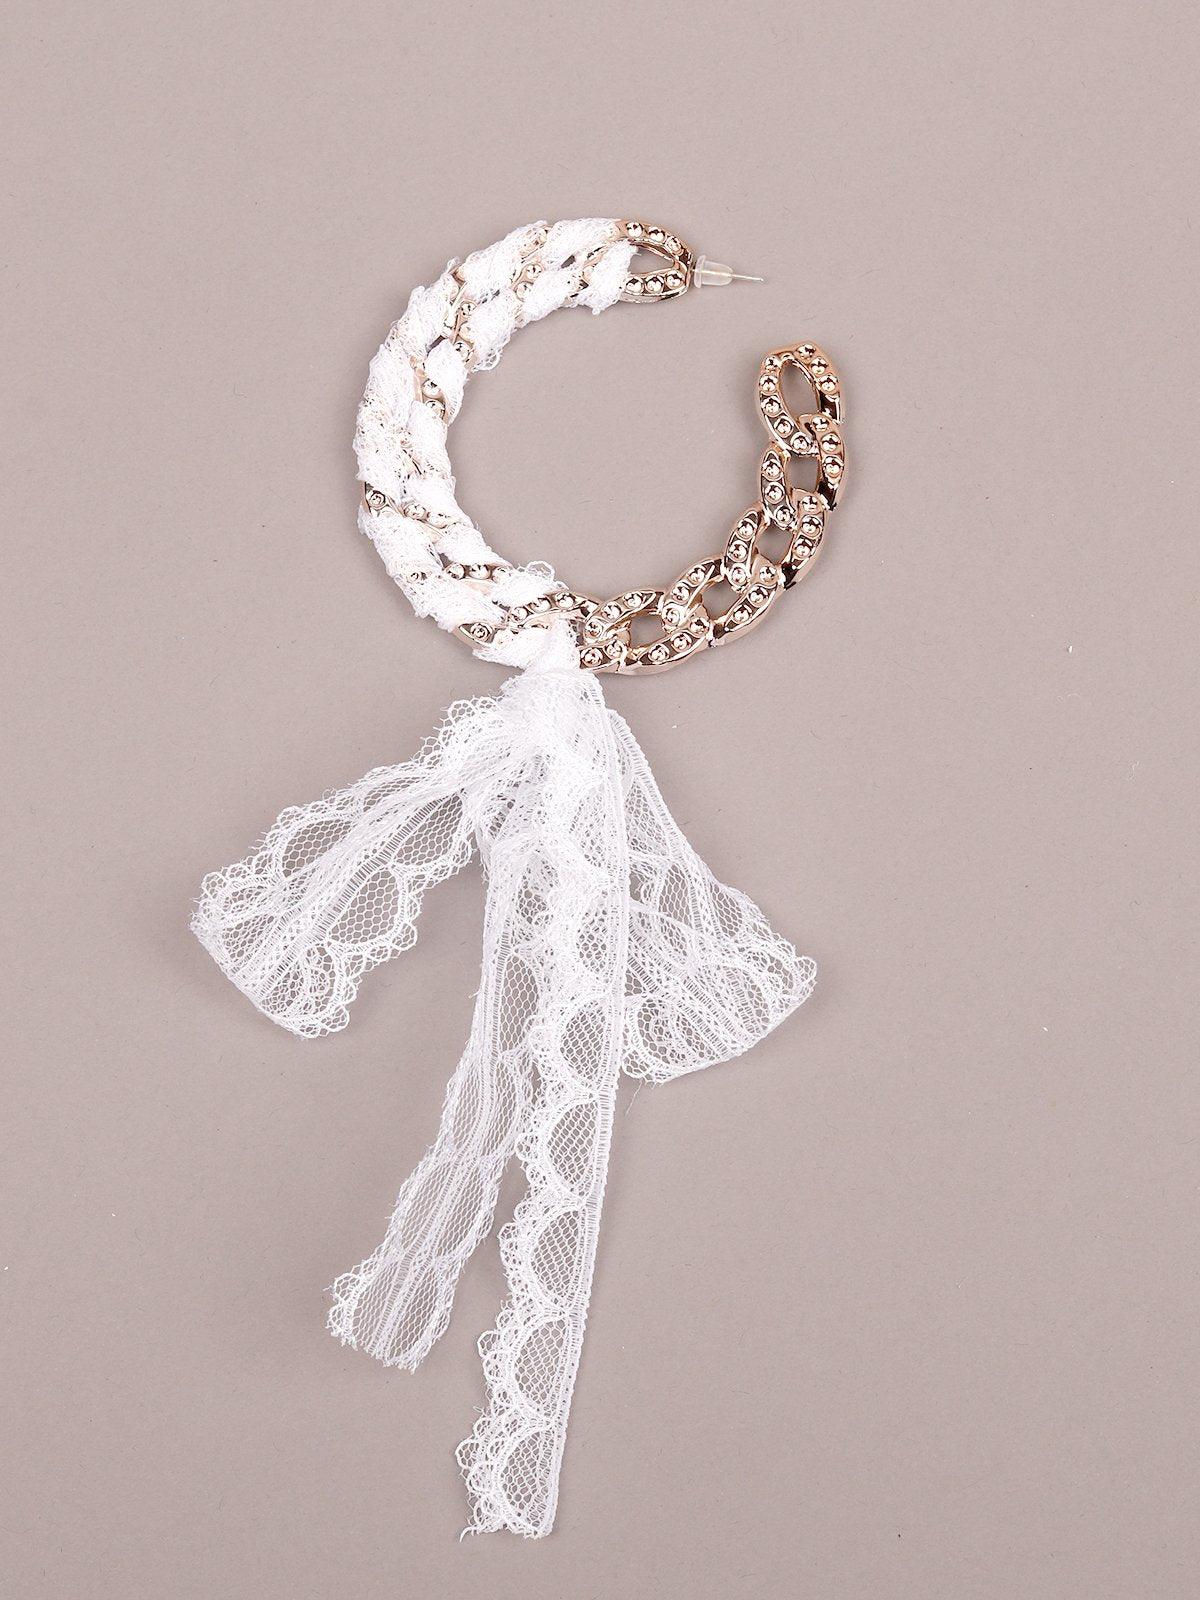 Women's Designer Chain Hoops Wrapped With White Lace - Odette